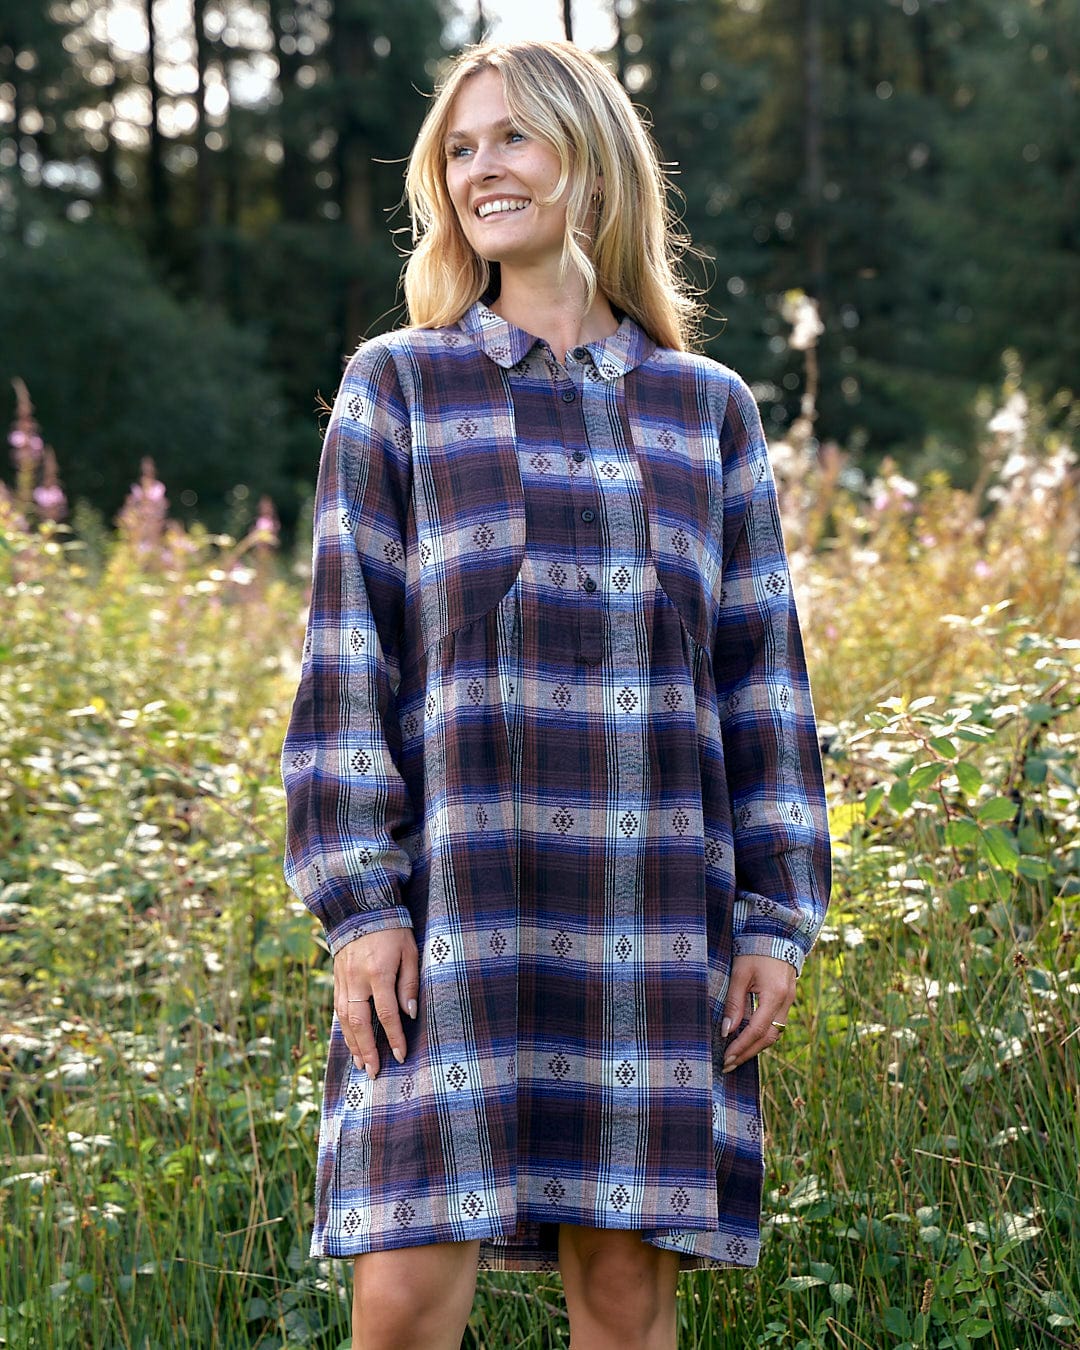 A woman in the Saltrock Ivy - Womens Jacquard Check Shirt Dress - Purple with a flattering silhouette standing in a field.